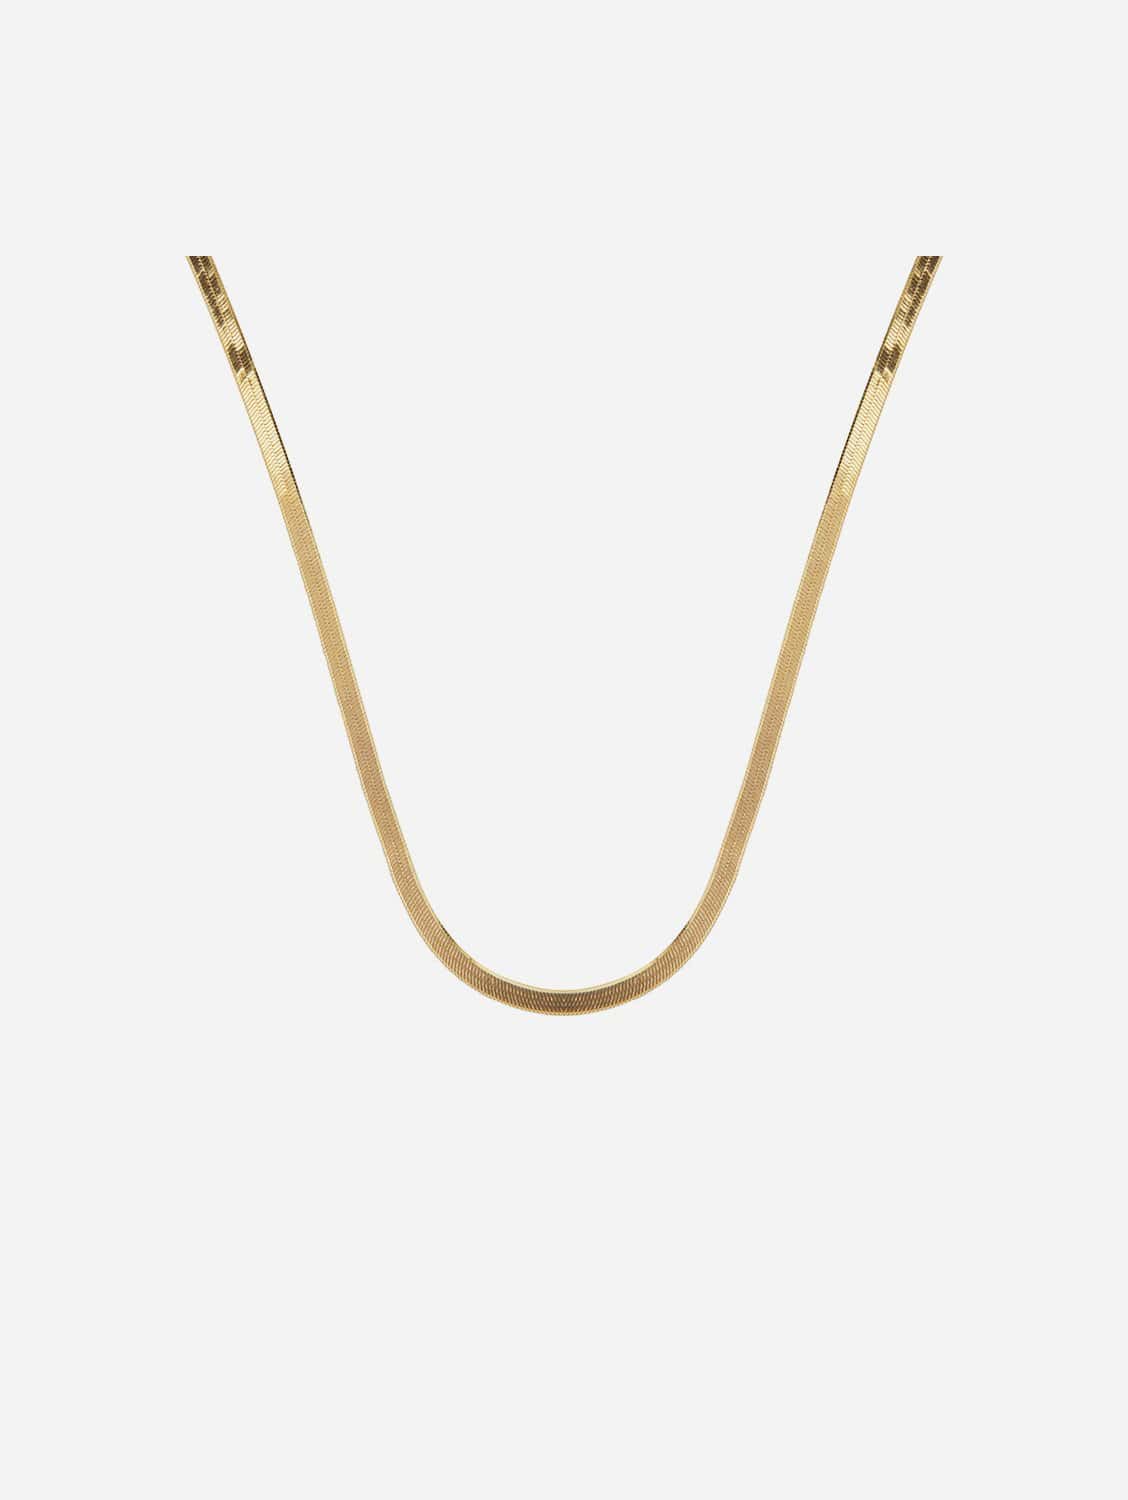 Ana Dyla Zara Recycled 925 Sterling Silver Necklace | Gold Vermeil